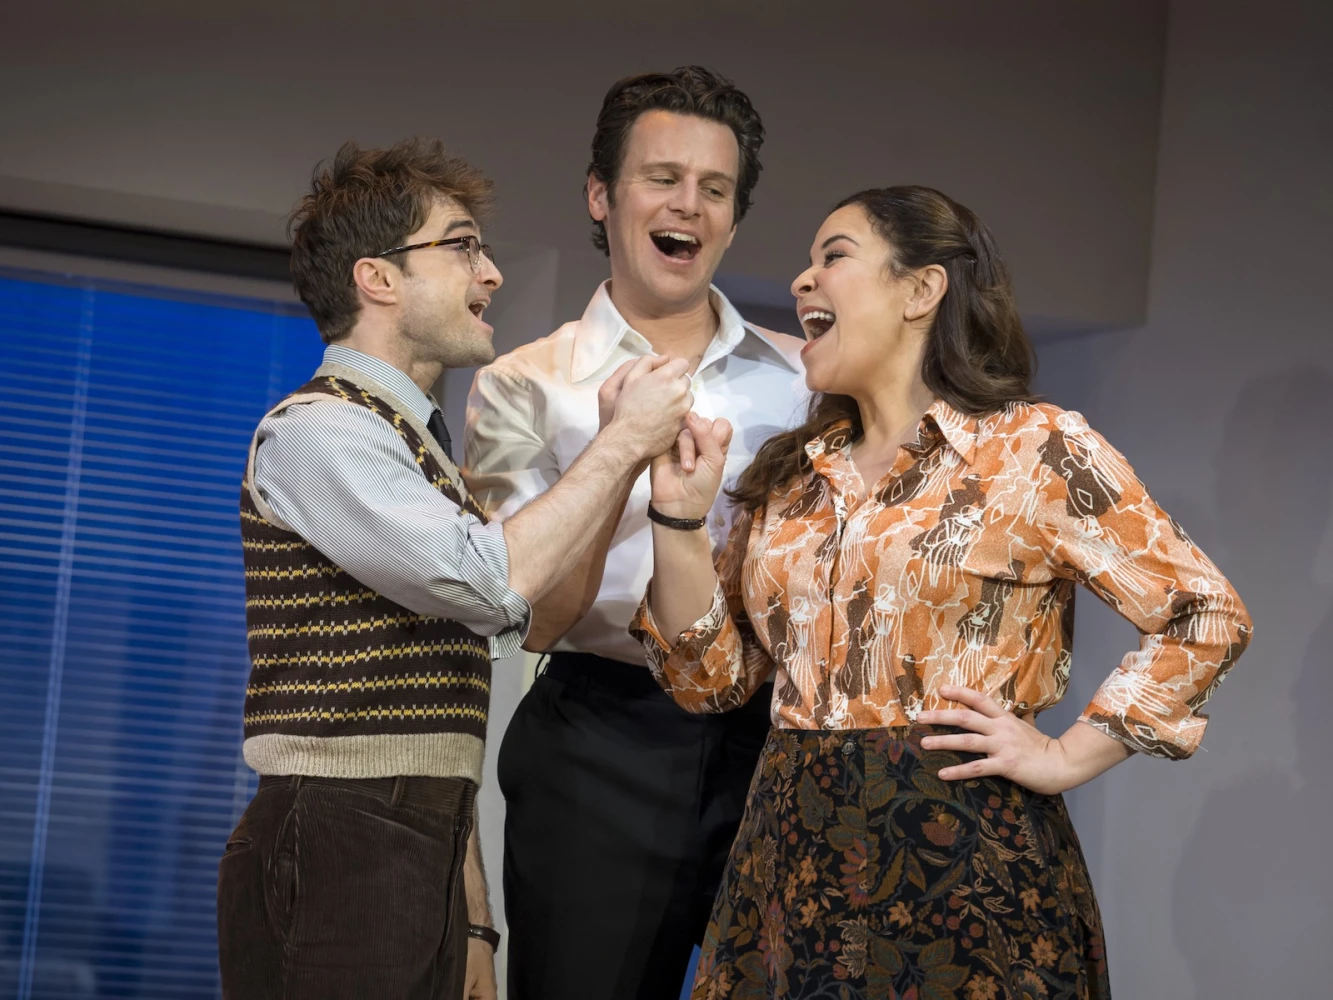 Merrily We Roll Along on Broadway: What to expect - 1